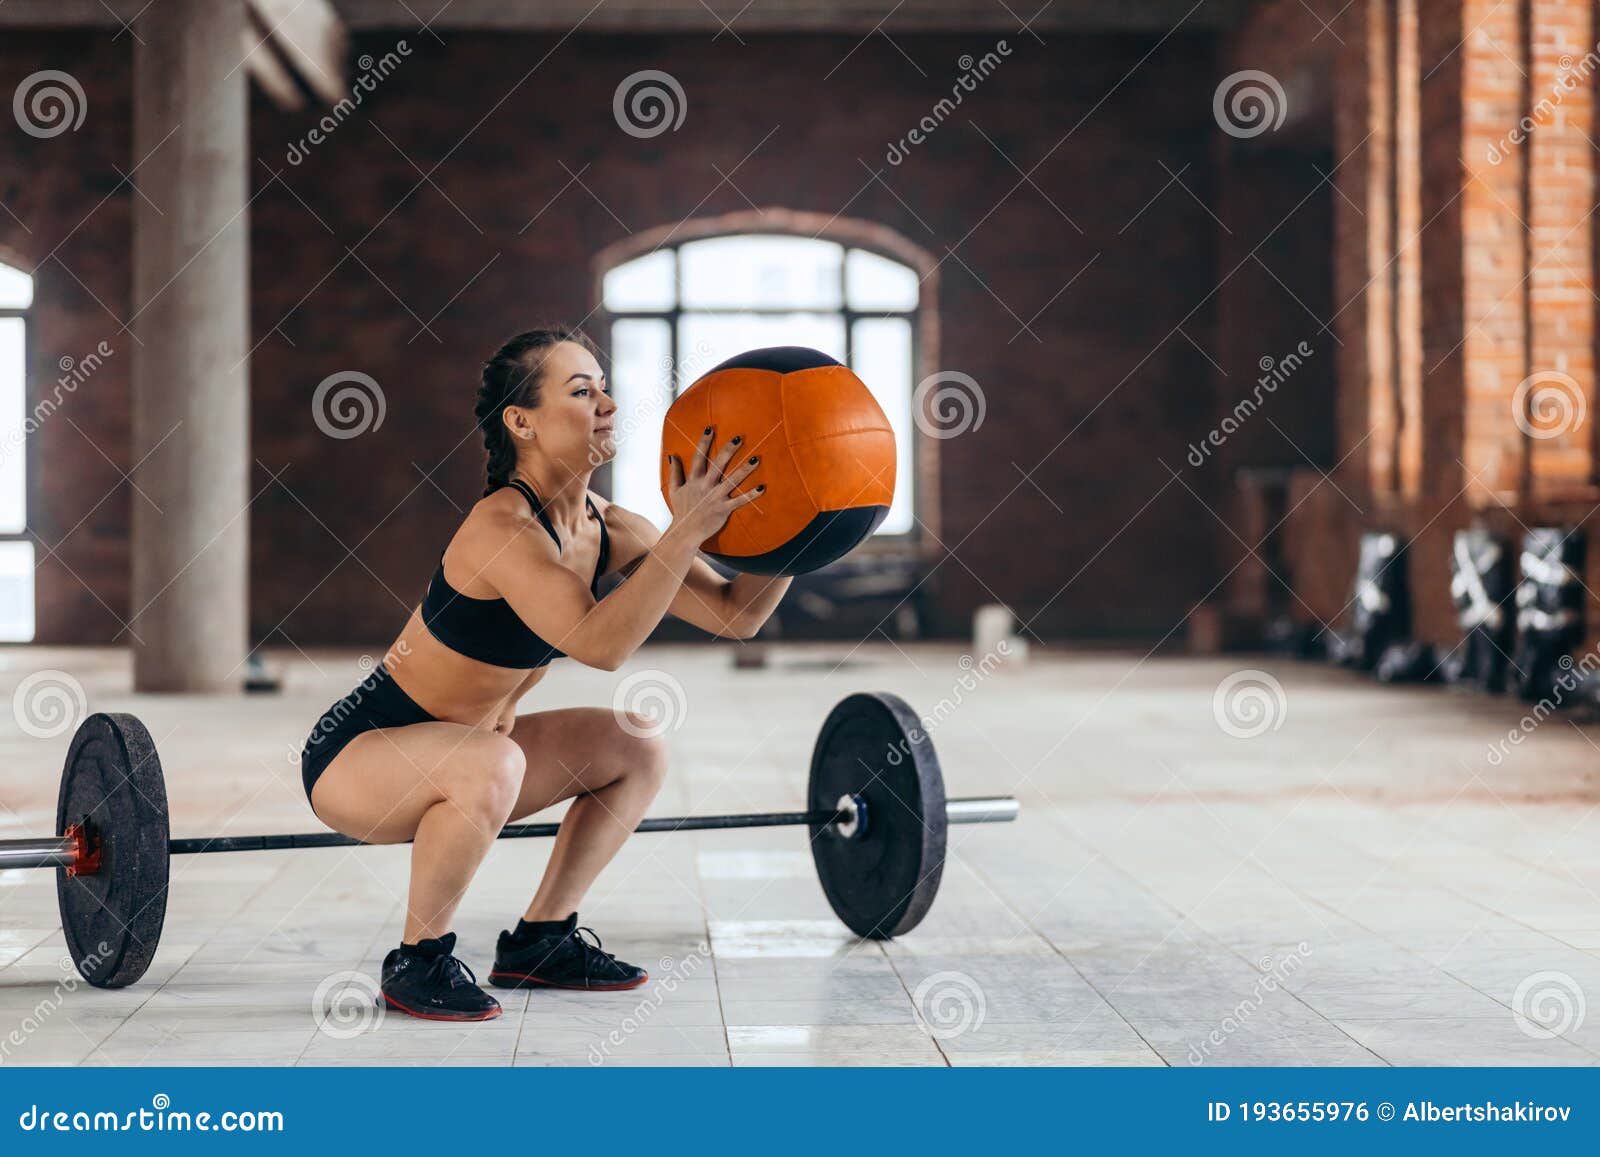 Well-built Motivated Girl Doing Squat Exercises with Fitness Ball ...